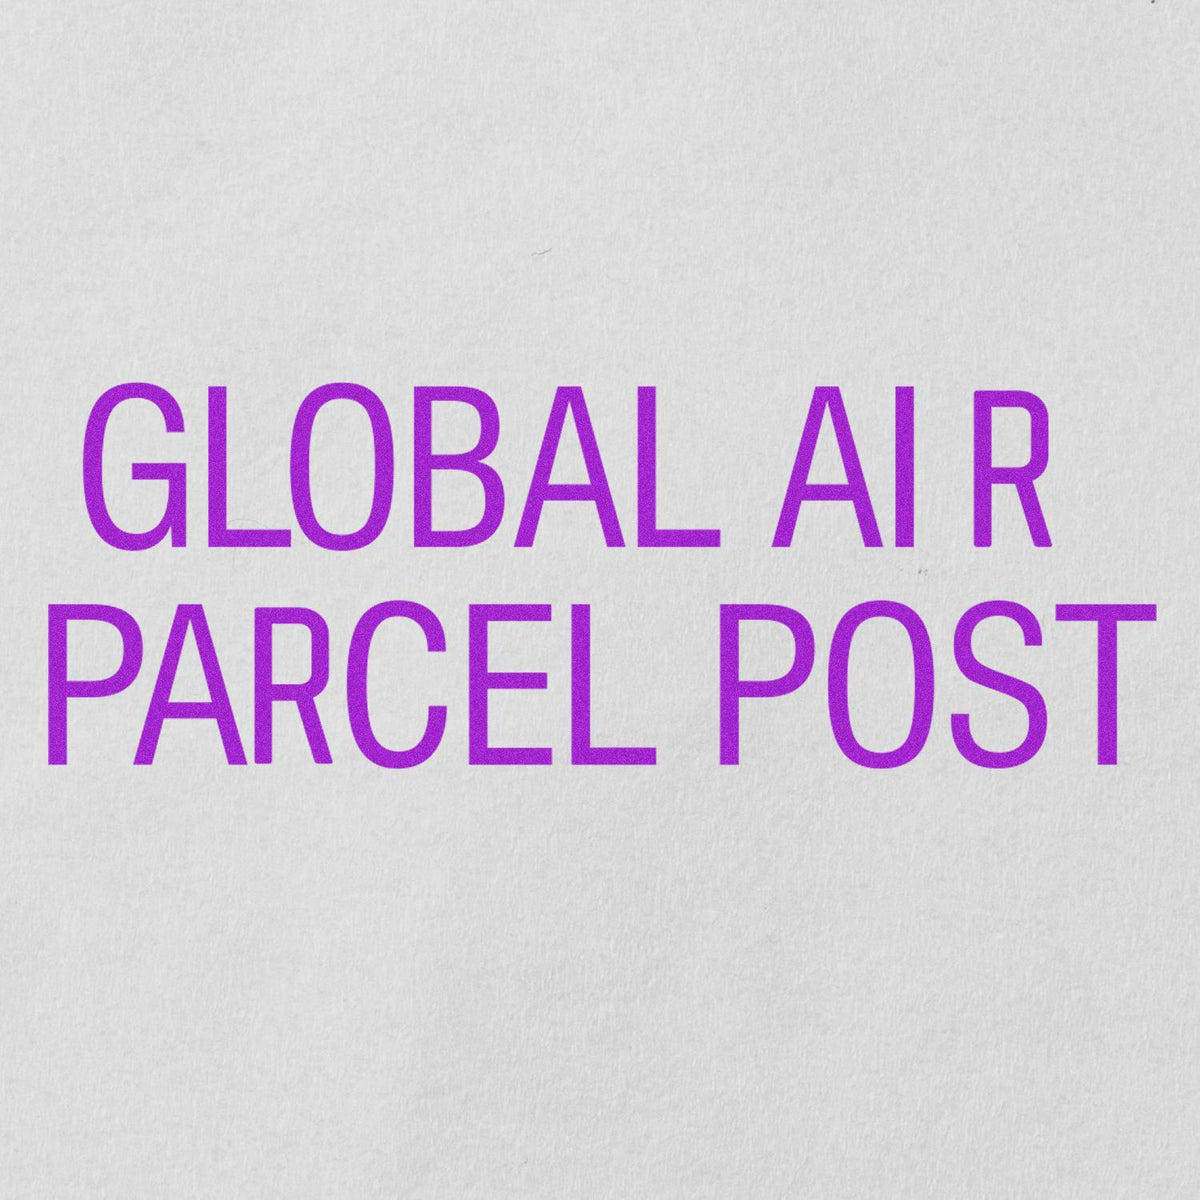 Global Air Parcel Post Rubber Stamp In Use